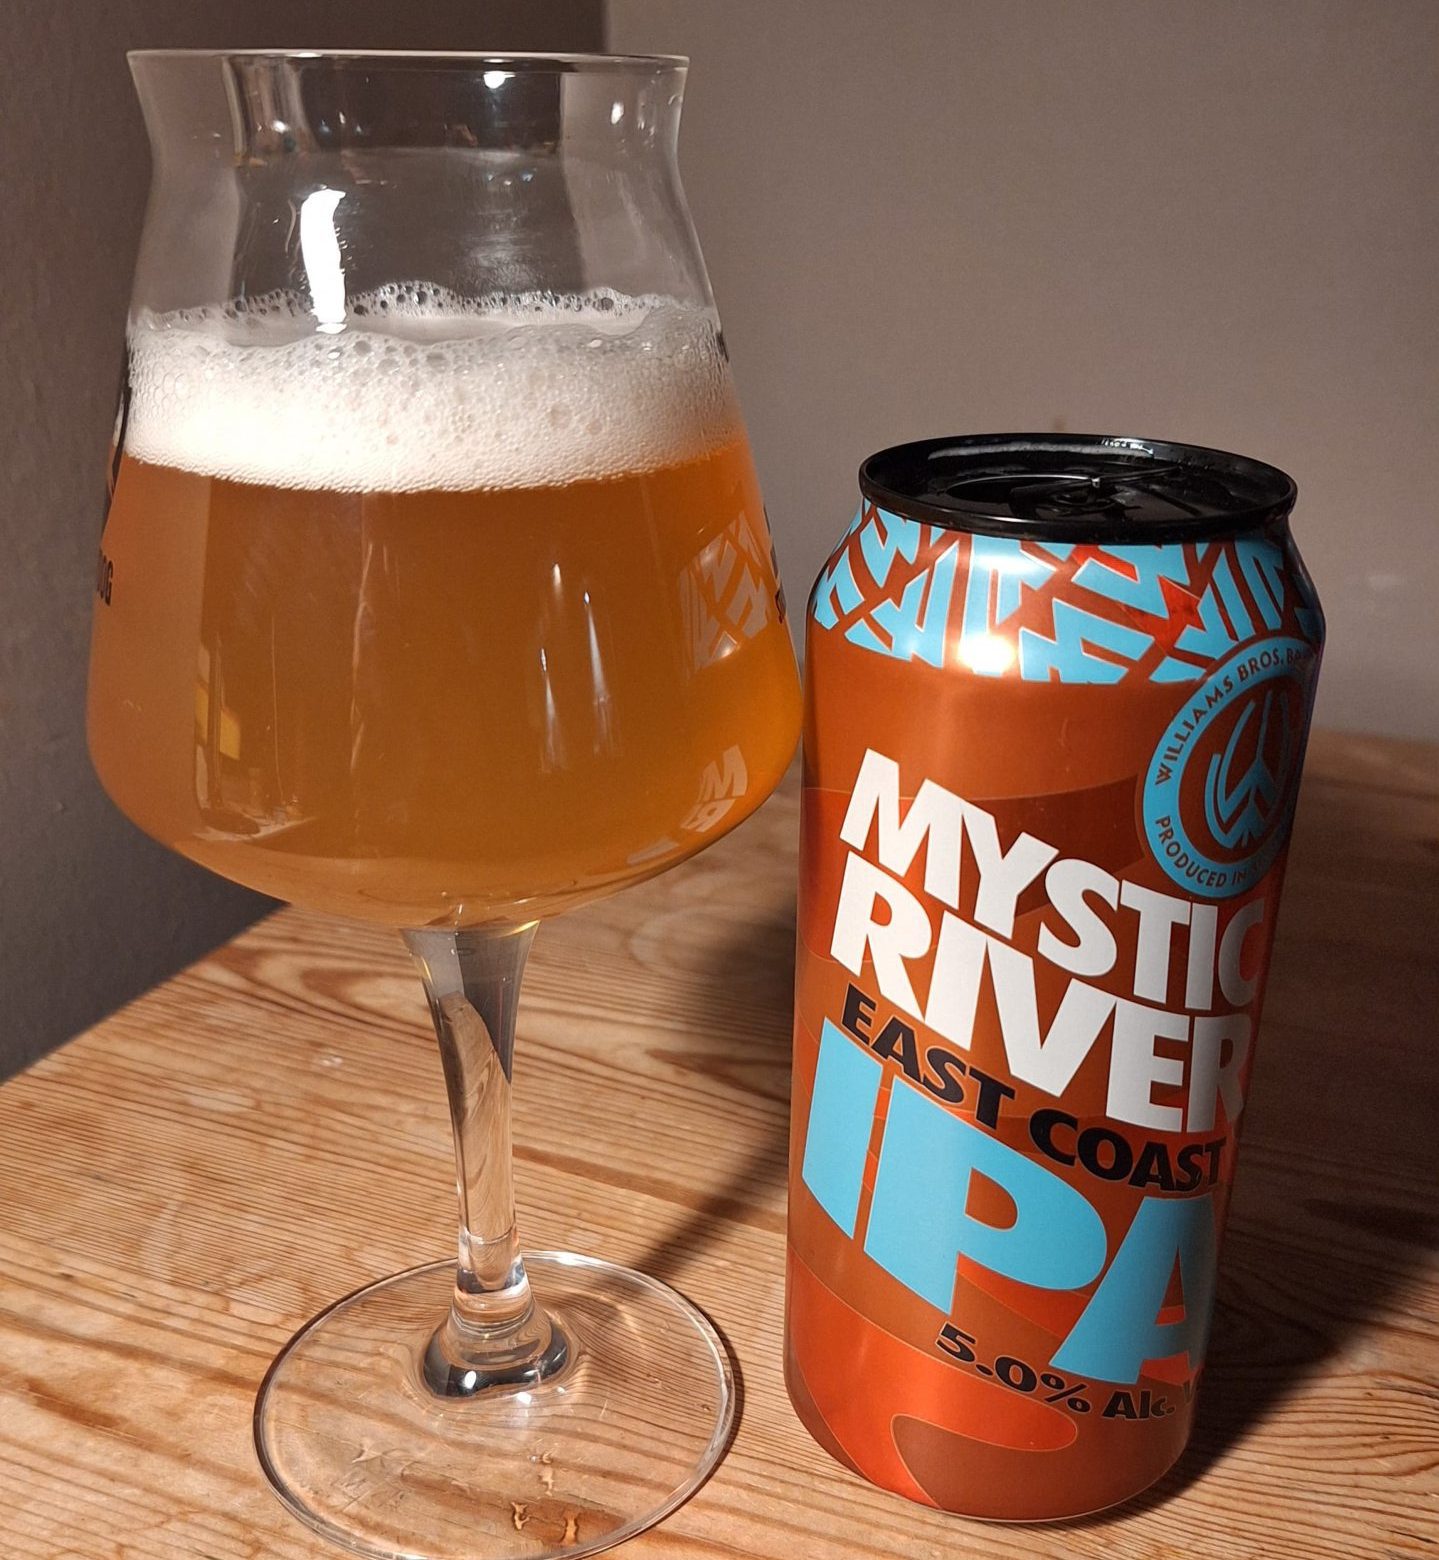 The Mystic River IPA poured into a glass. 